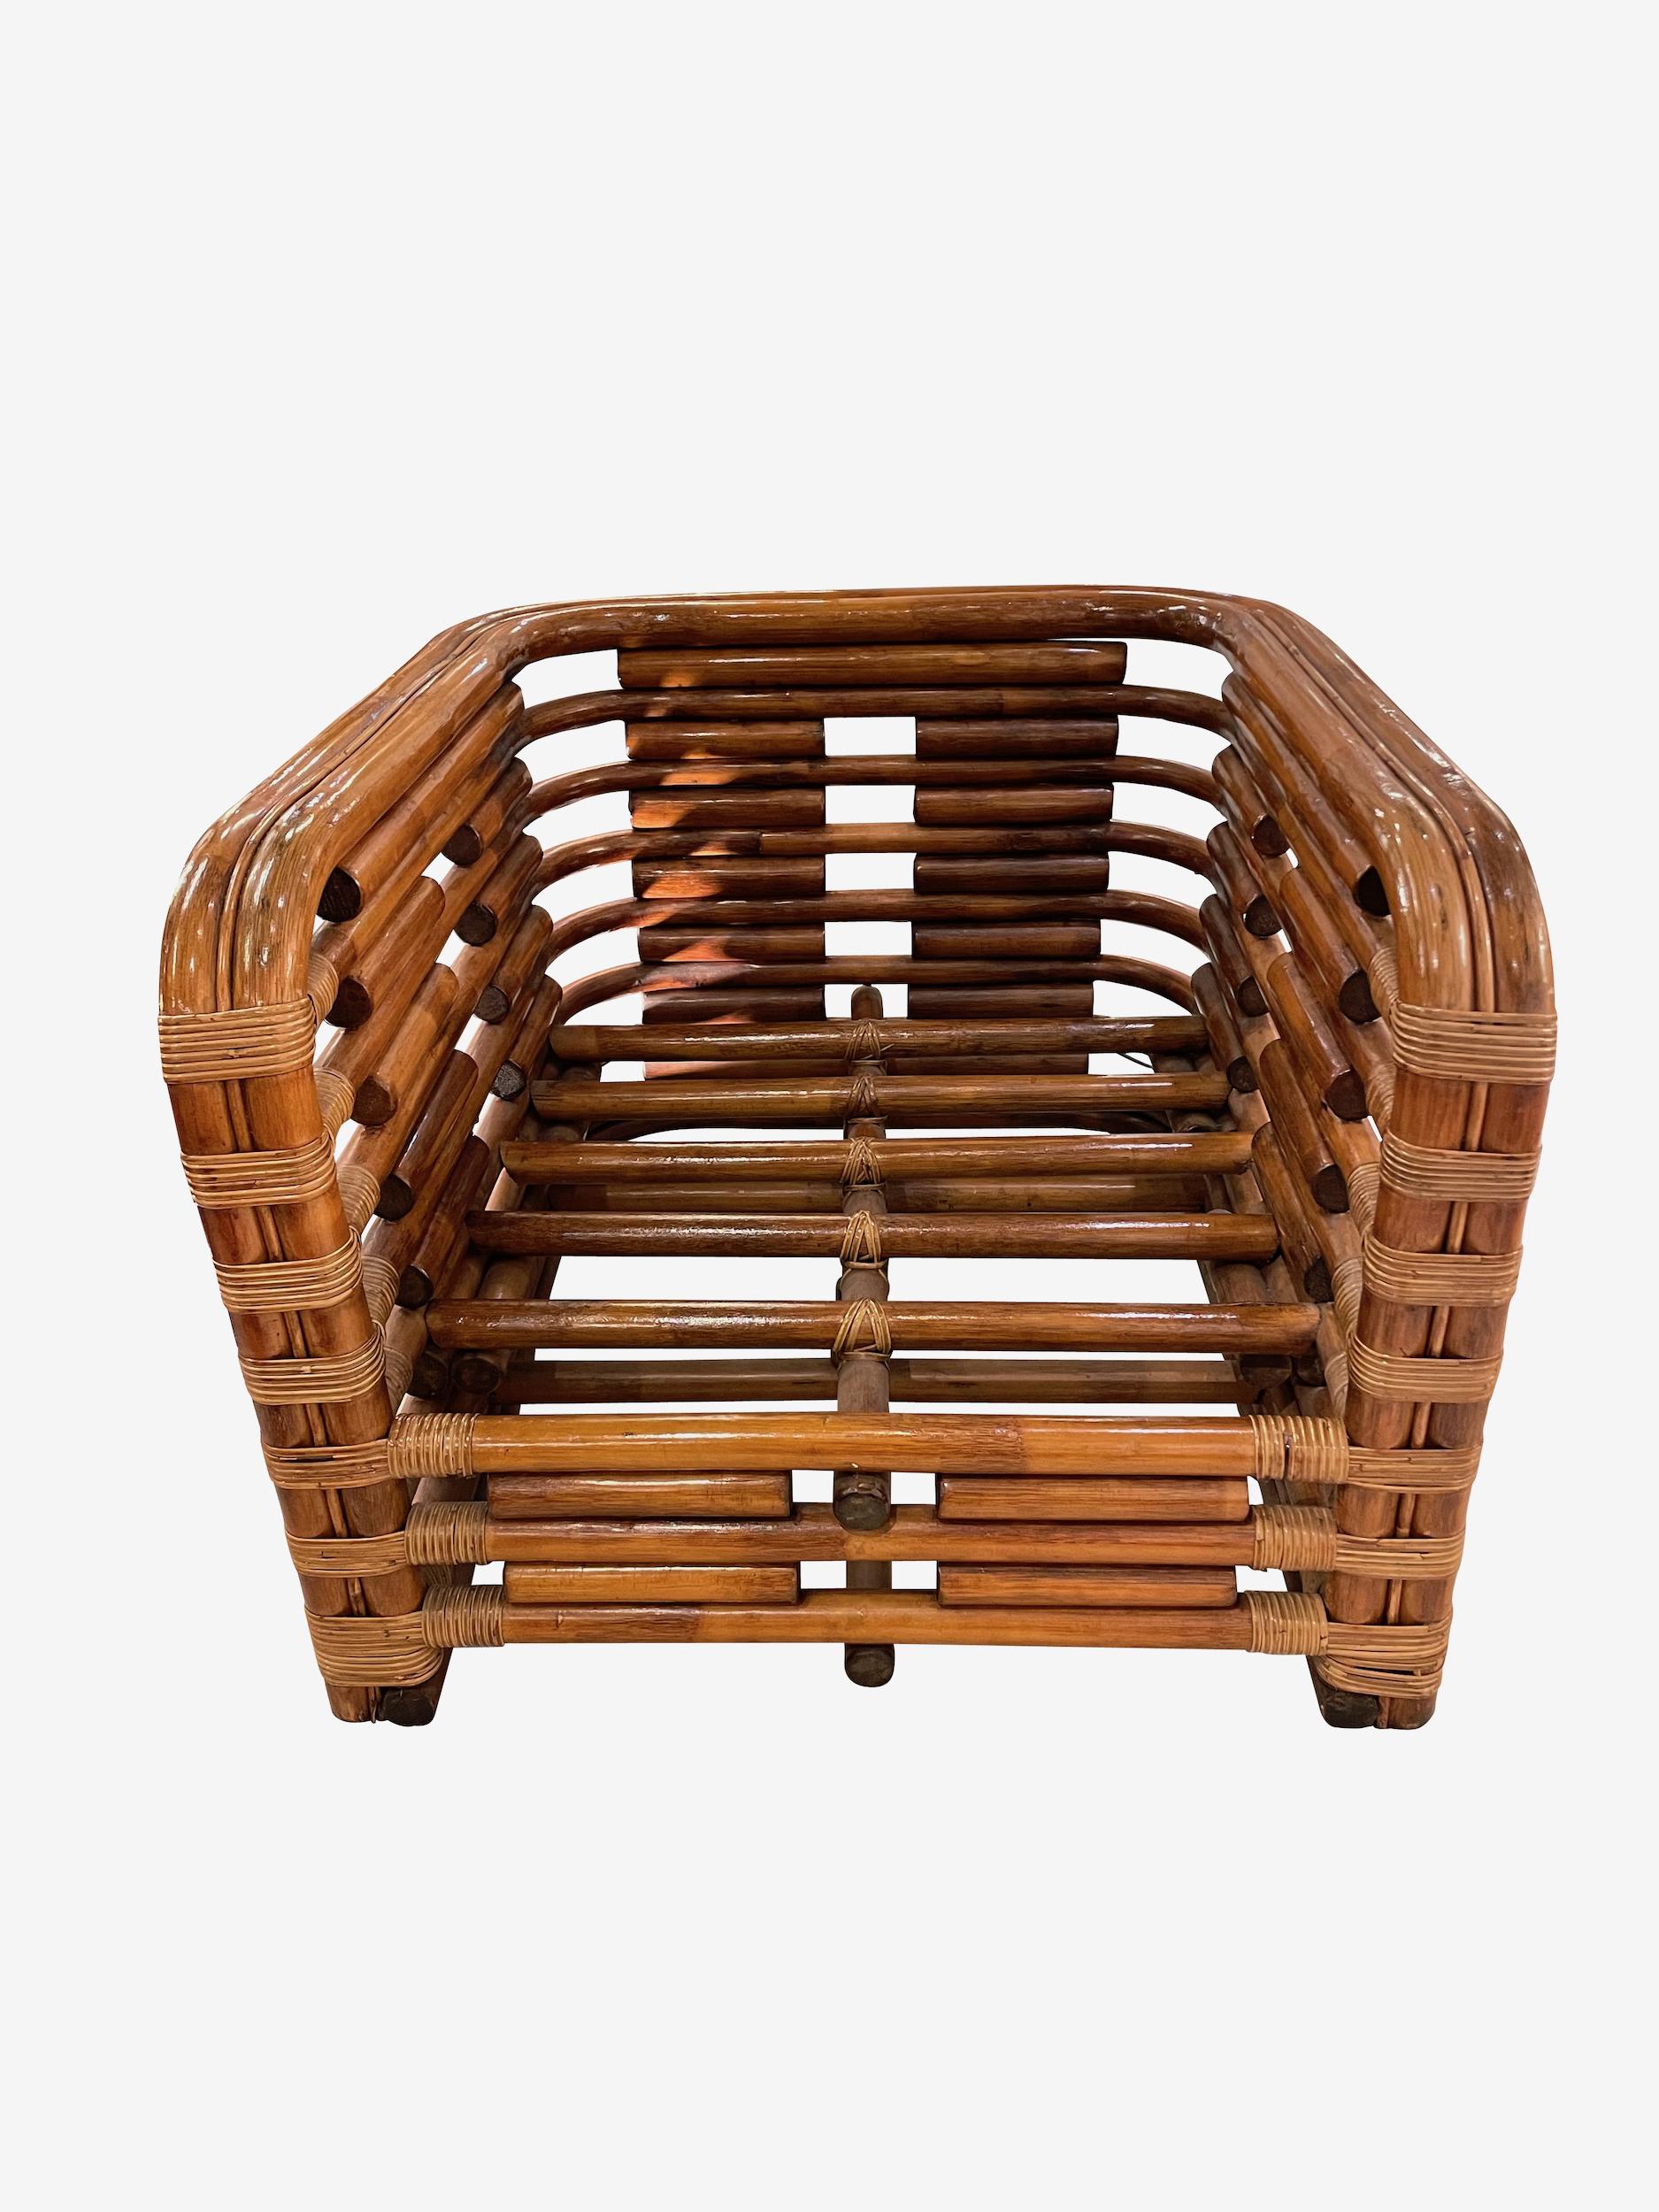 Rattan Set of Six Seating Set, France, 1950s For Sale 4